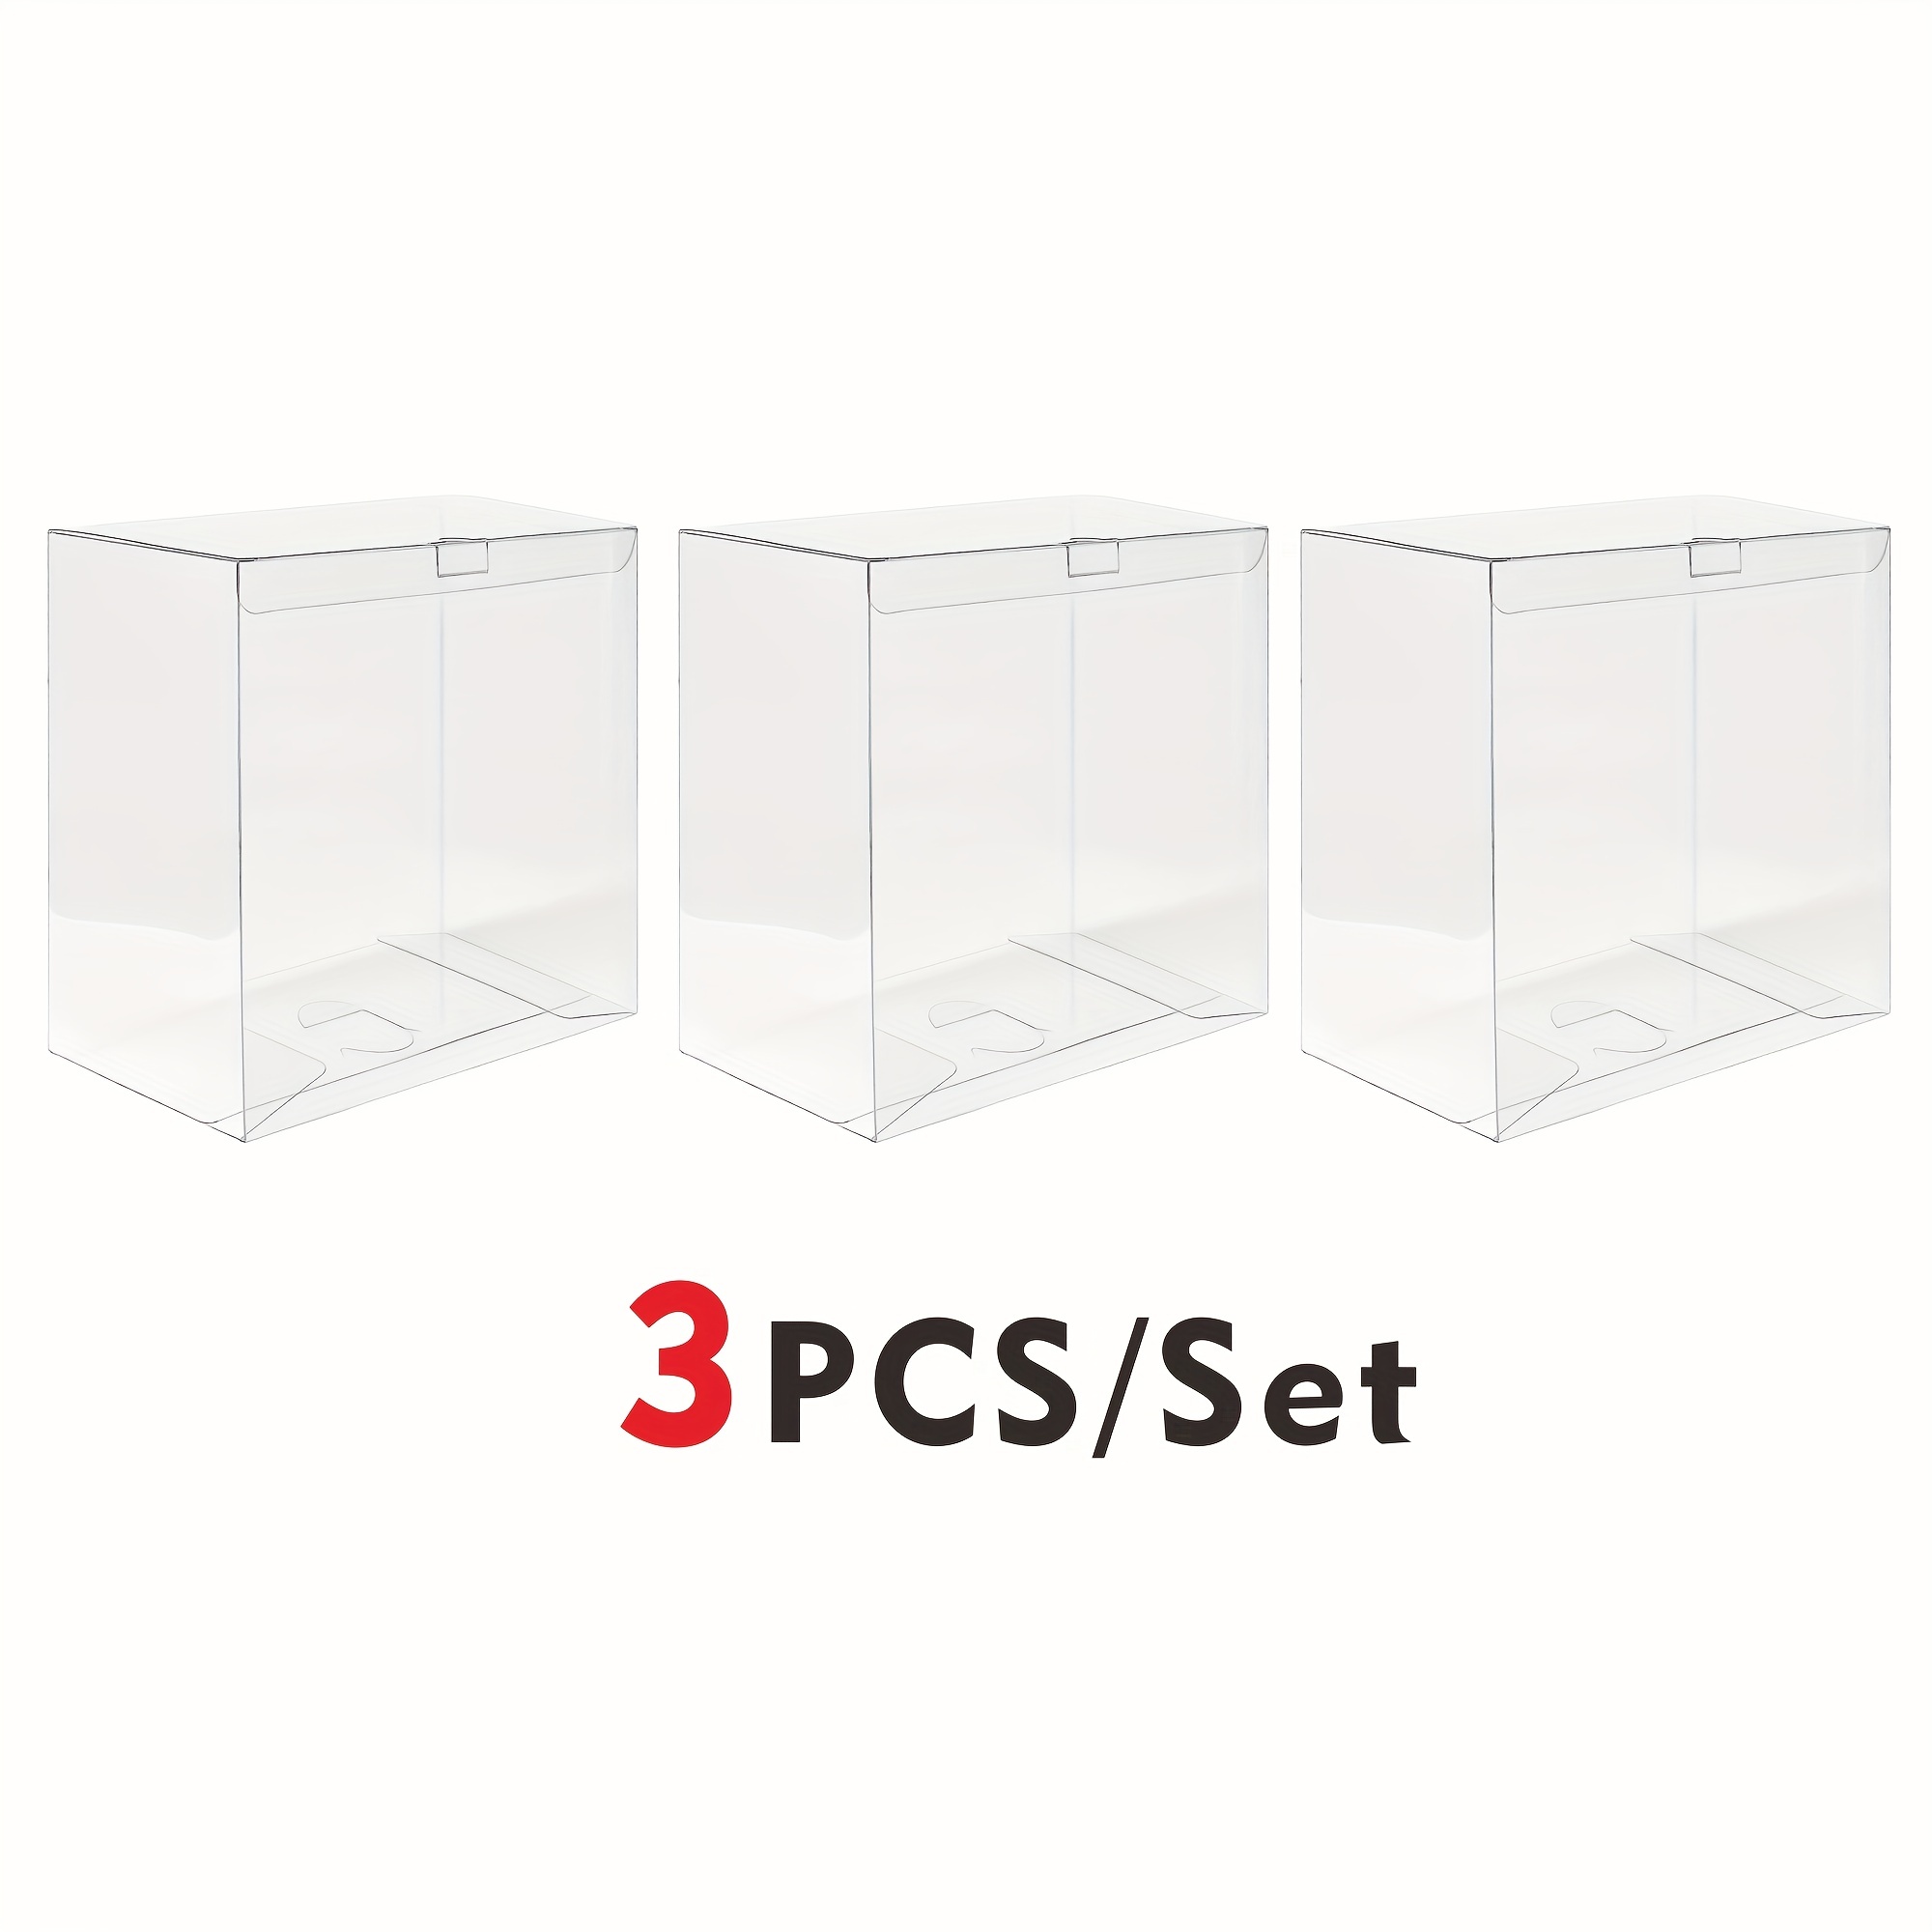 Clear Plastic Boxes Small Set of 25 in Display Holder Case Box